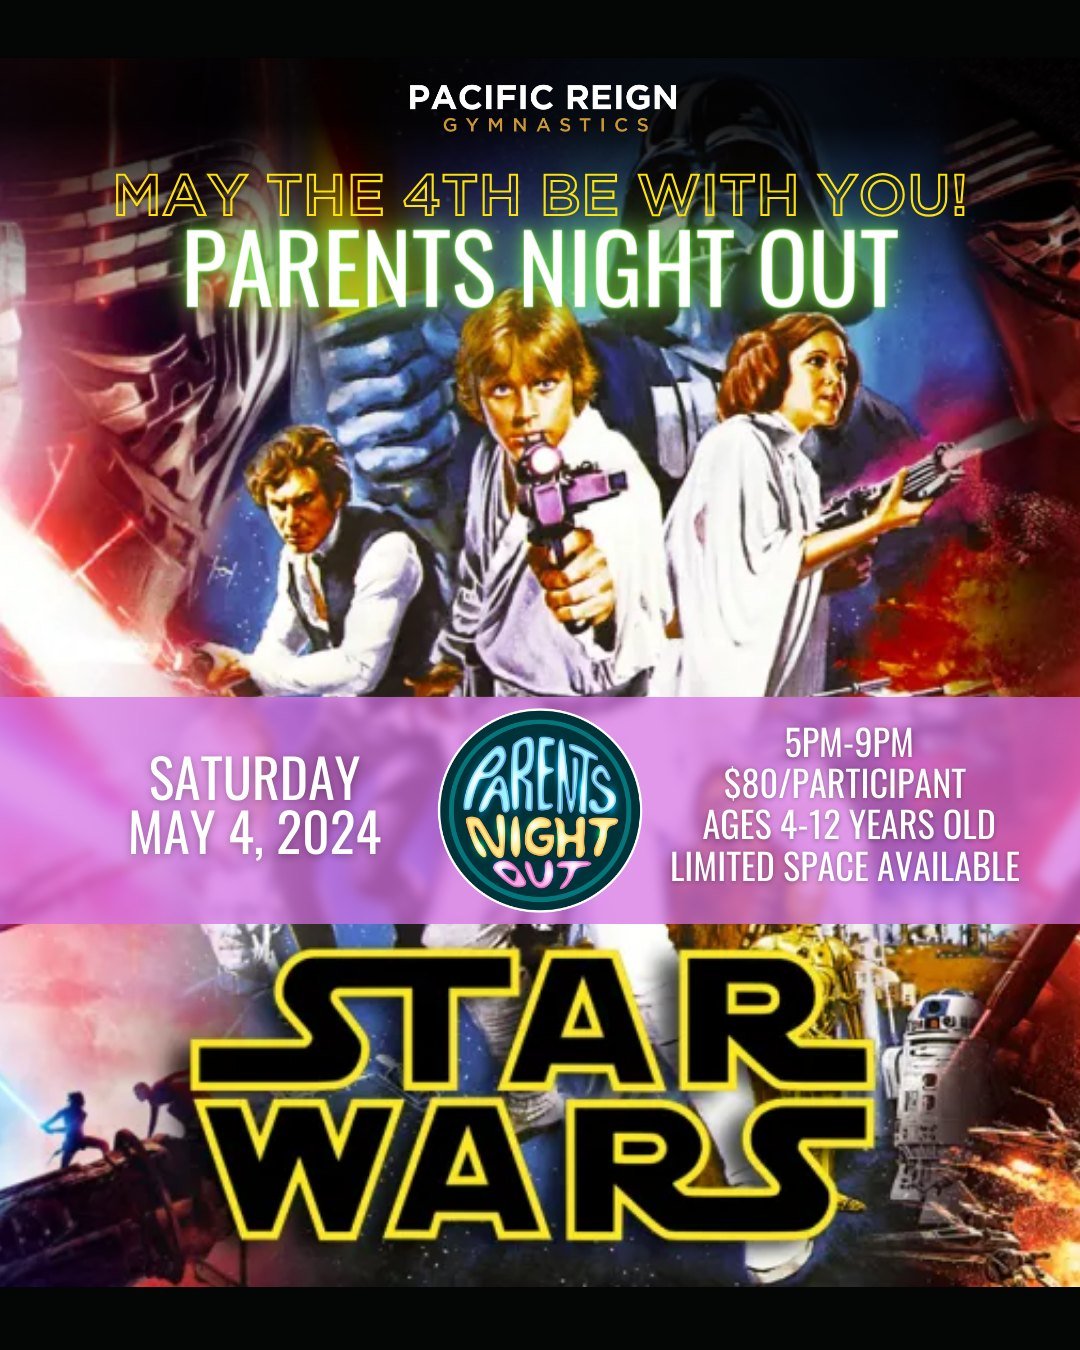 𝗠𝗮𝘆 𝘁𝗵𝗲 𝟰𝘁𝗵 𝗯𝗲 𝘄𝗶𝘁𝗵 𝗬𝗢𝗨! 🫵

✨ In honor of the annual Star Wars Day on May 4th, we are hosting a &quot;May the 4th be with you!&quot; themed Parents Night Out!

Drop off your kids at Pacific Reign Gymnastics to go out for date night